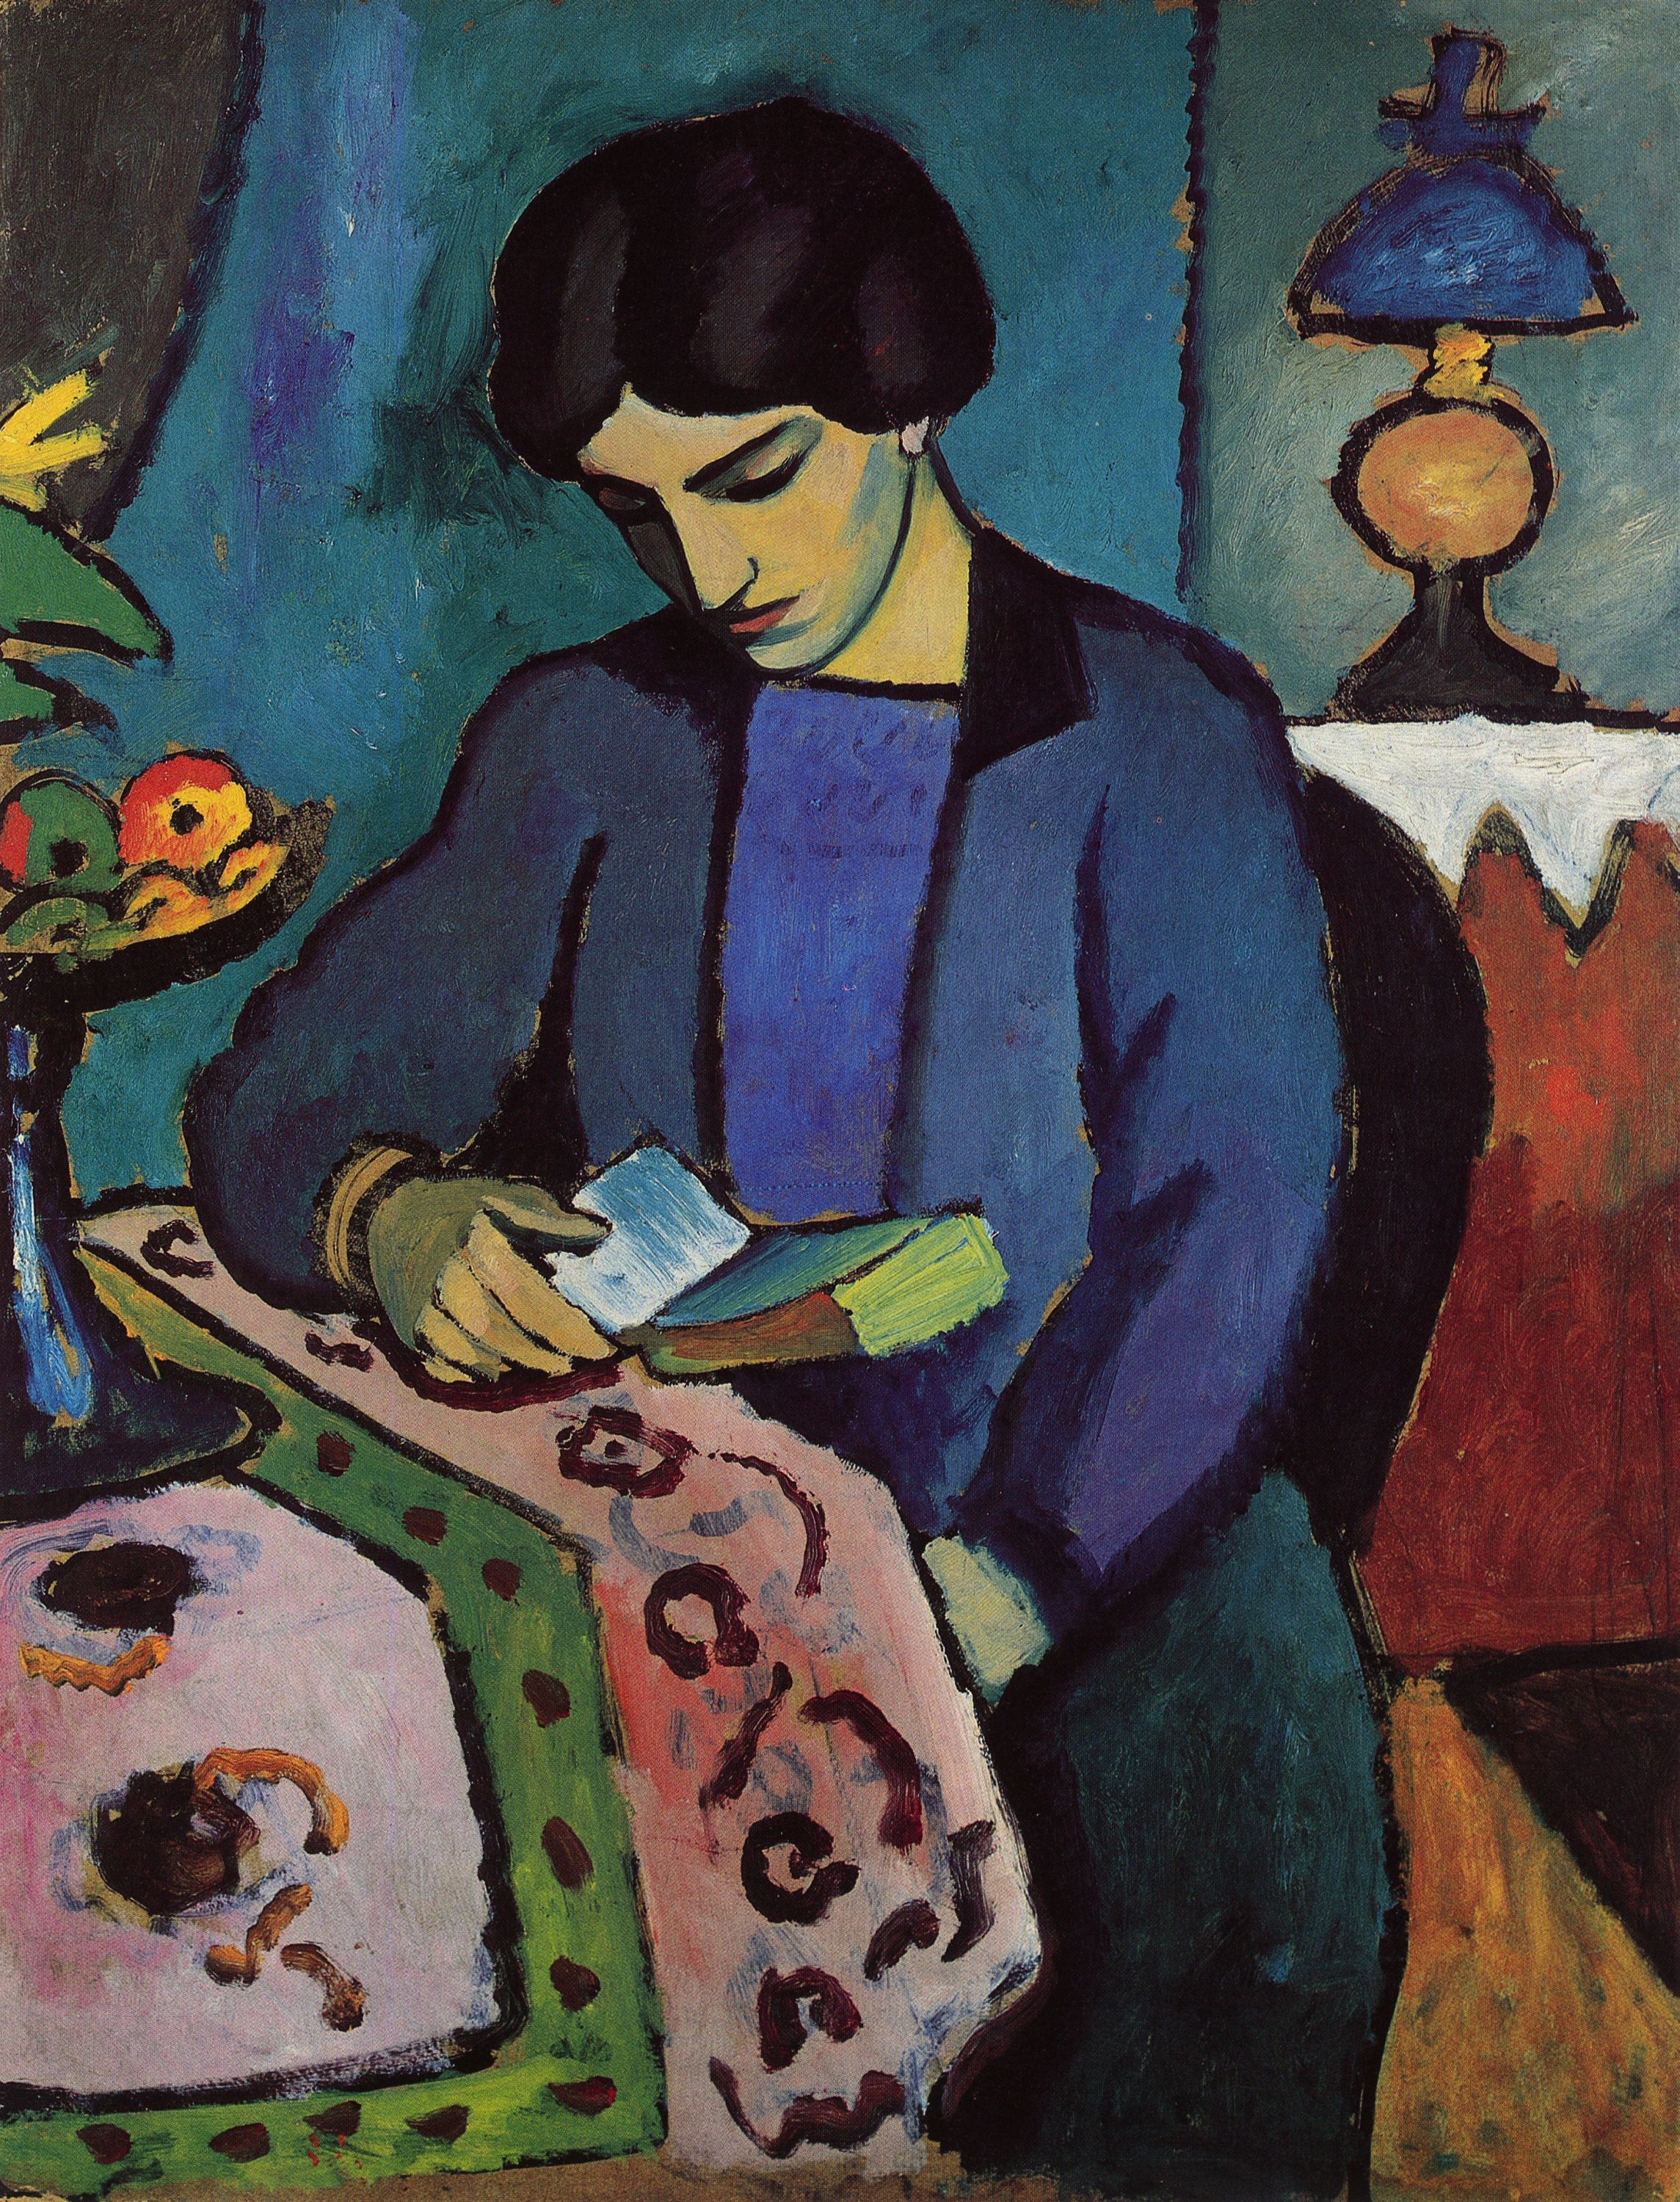 Blue Girl Reading by August Macke - 1914 private collection